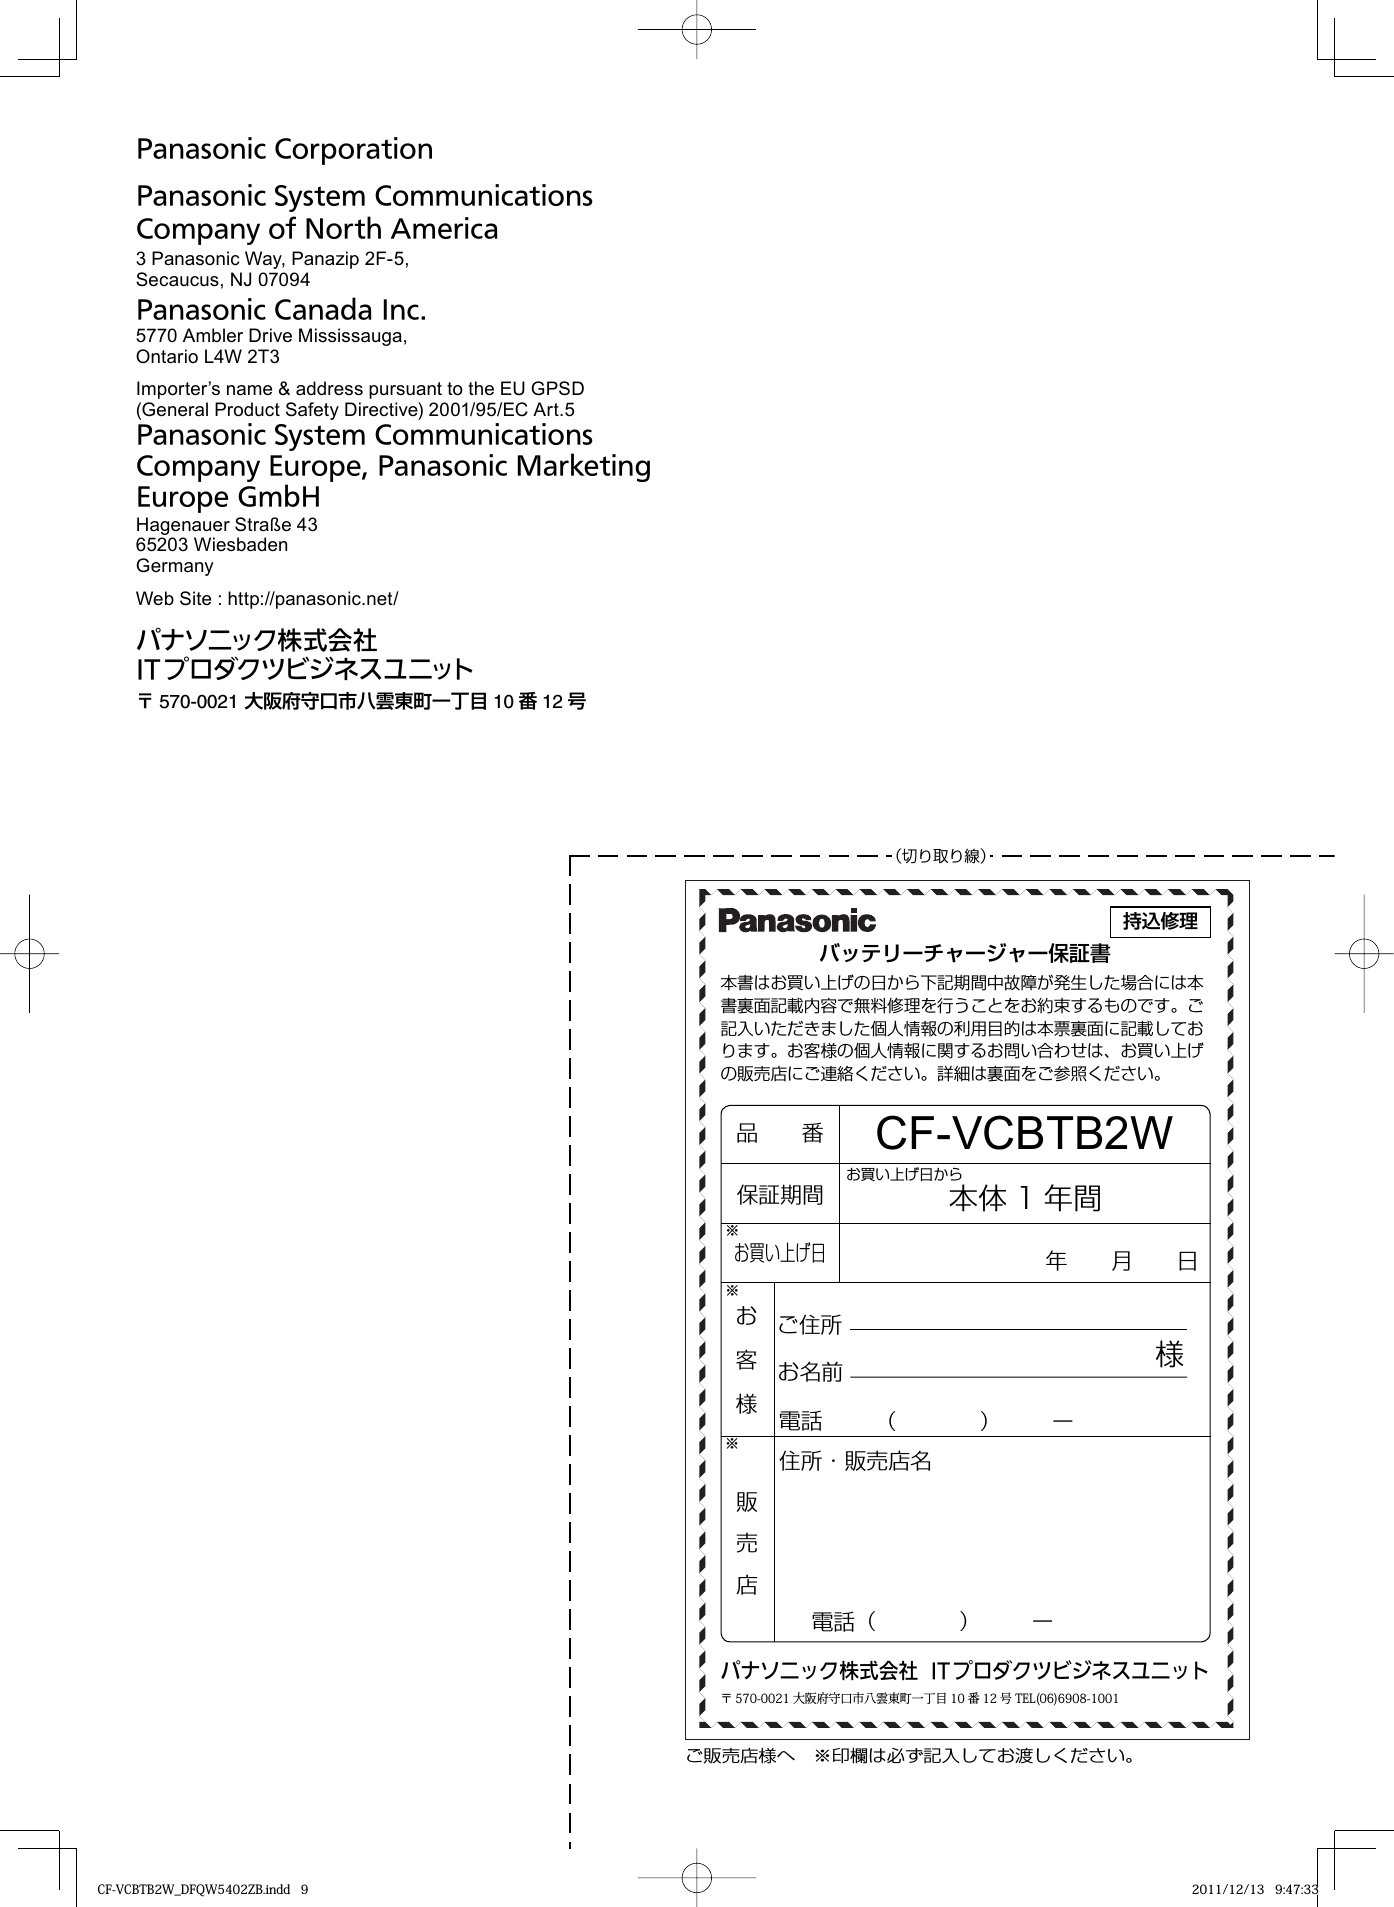 Page 8 of 8 - Panasonic CF-VCBxxx (Battery Charger) Operating Instructions User Manual : (English/ German/ French/ Korean/ Japanese) (Revision) Vcbtb2w-oi-dfqw5402ya-non-nonlogo-JMGFKO-p20110780